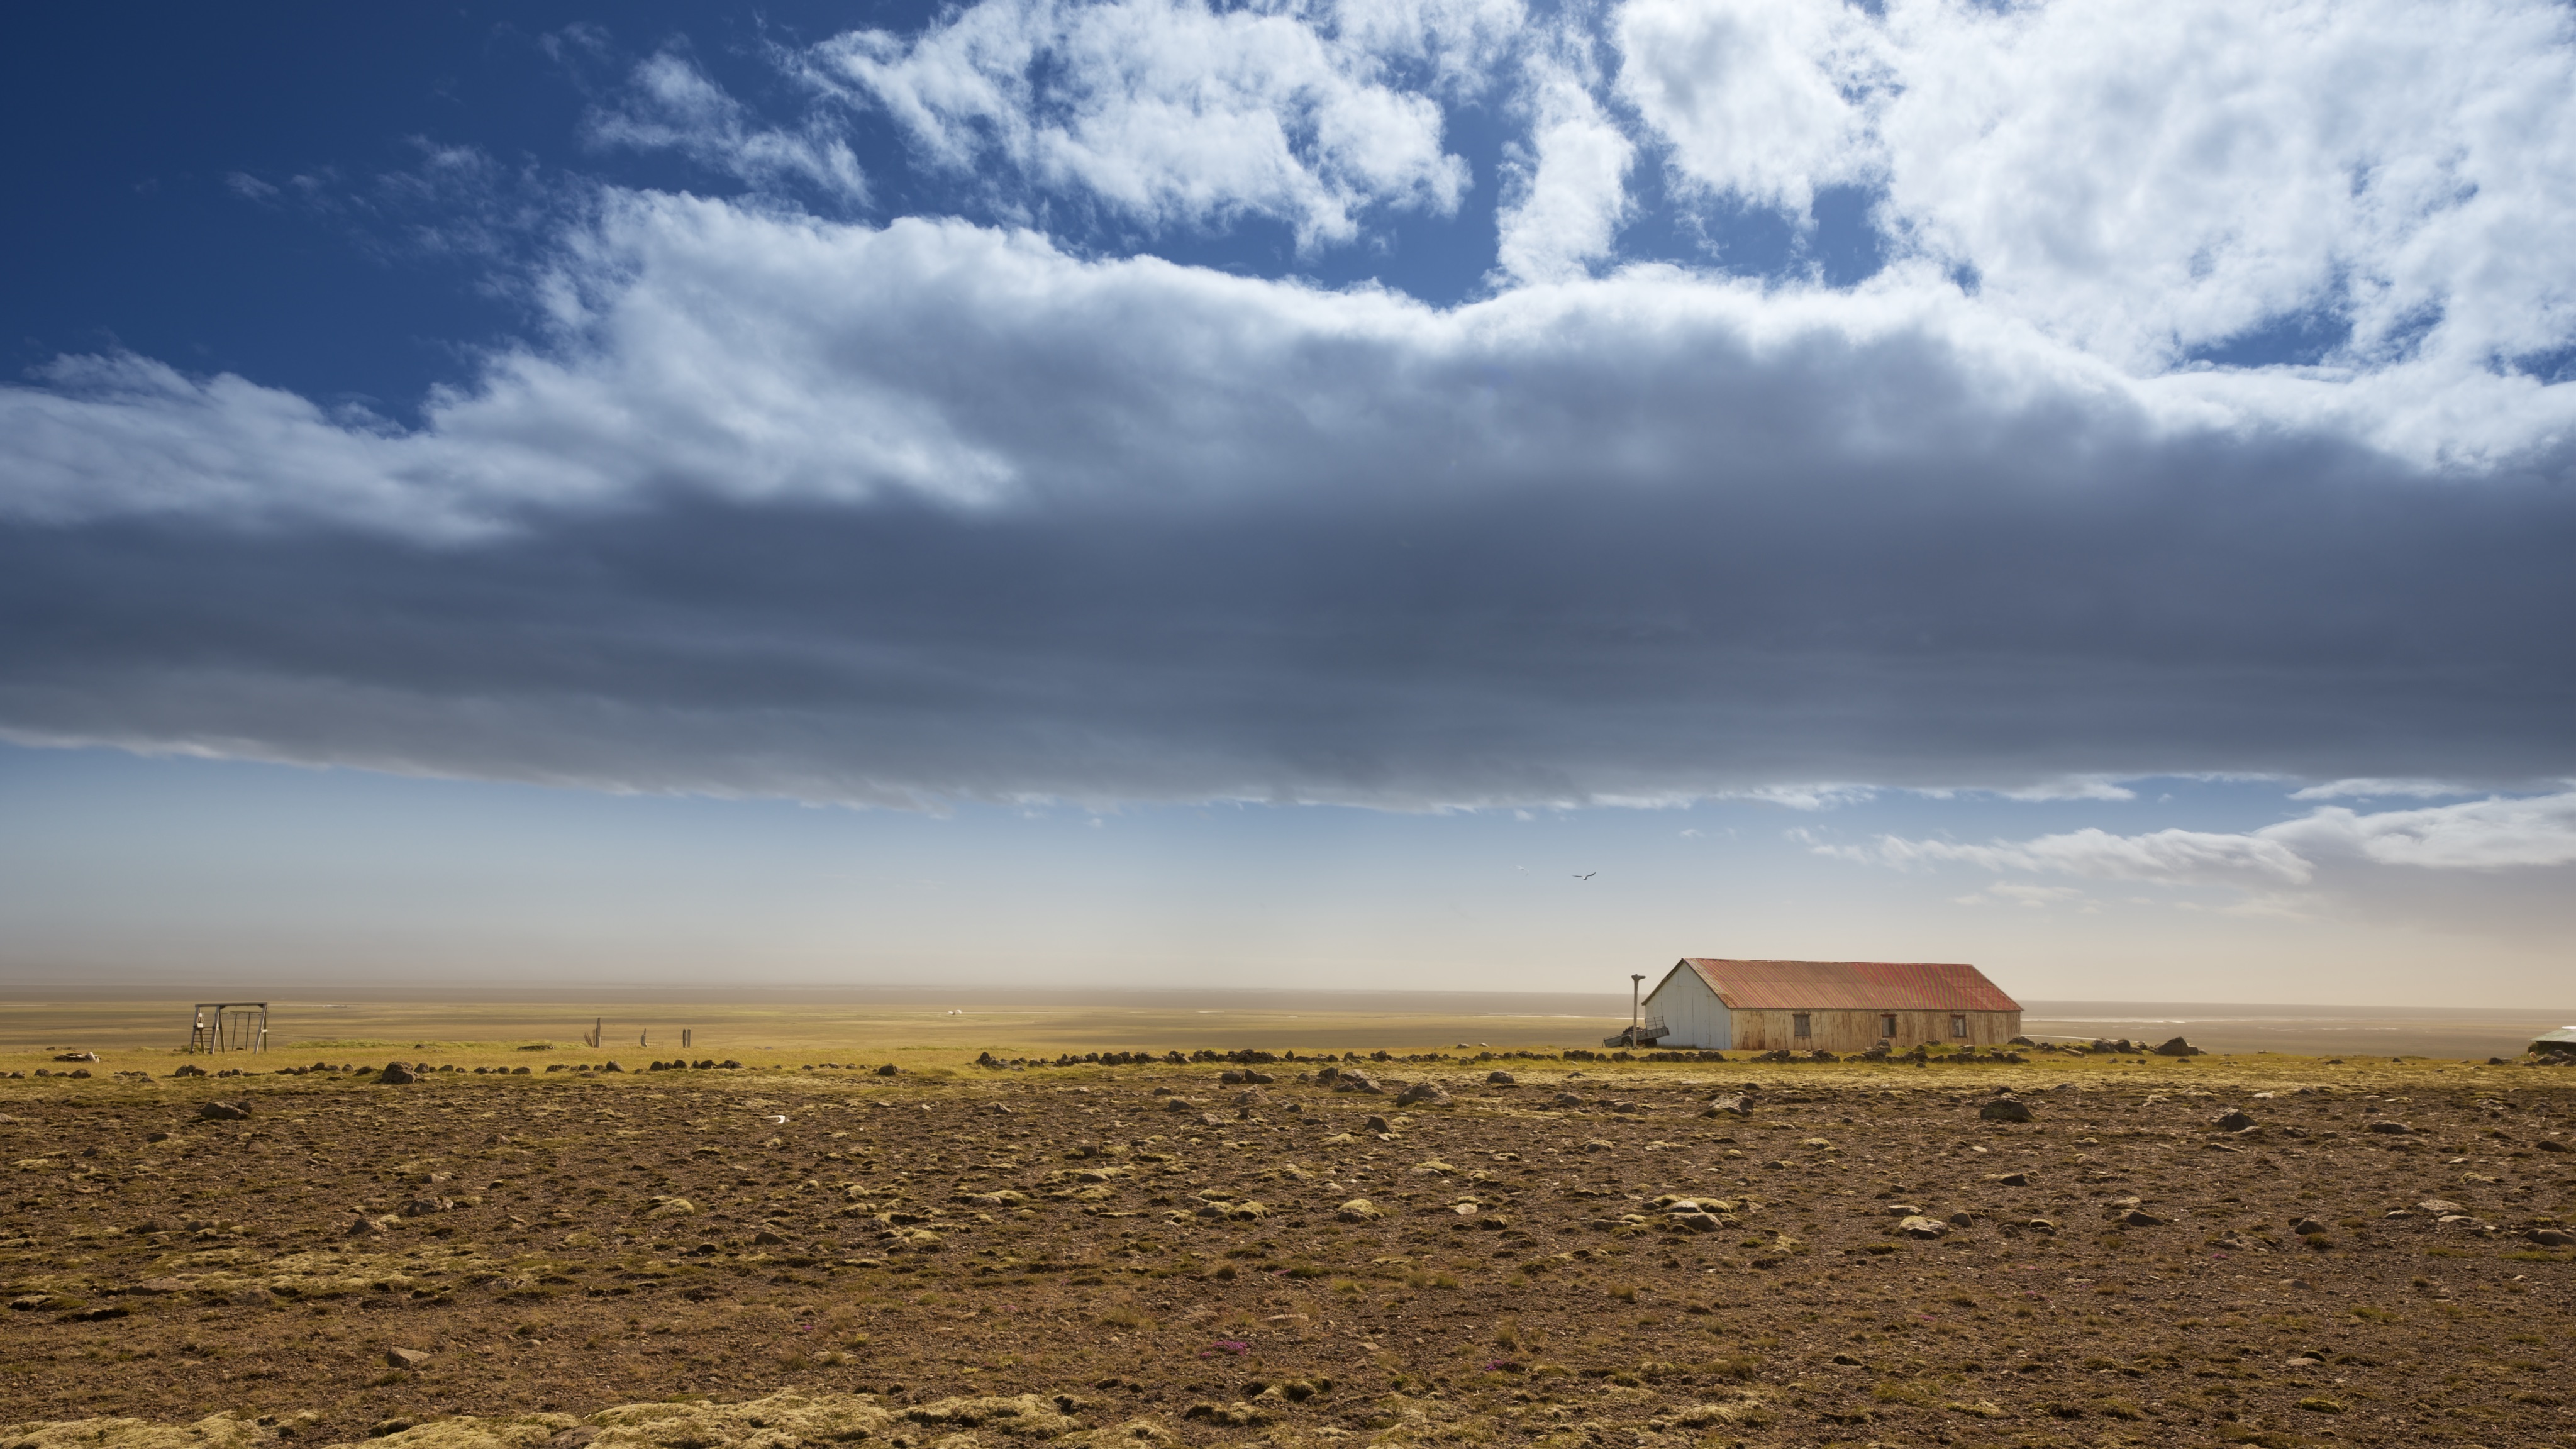 A lone house with a red roof, windswept plains under a blue cloudy sky